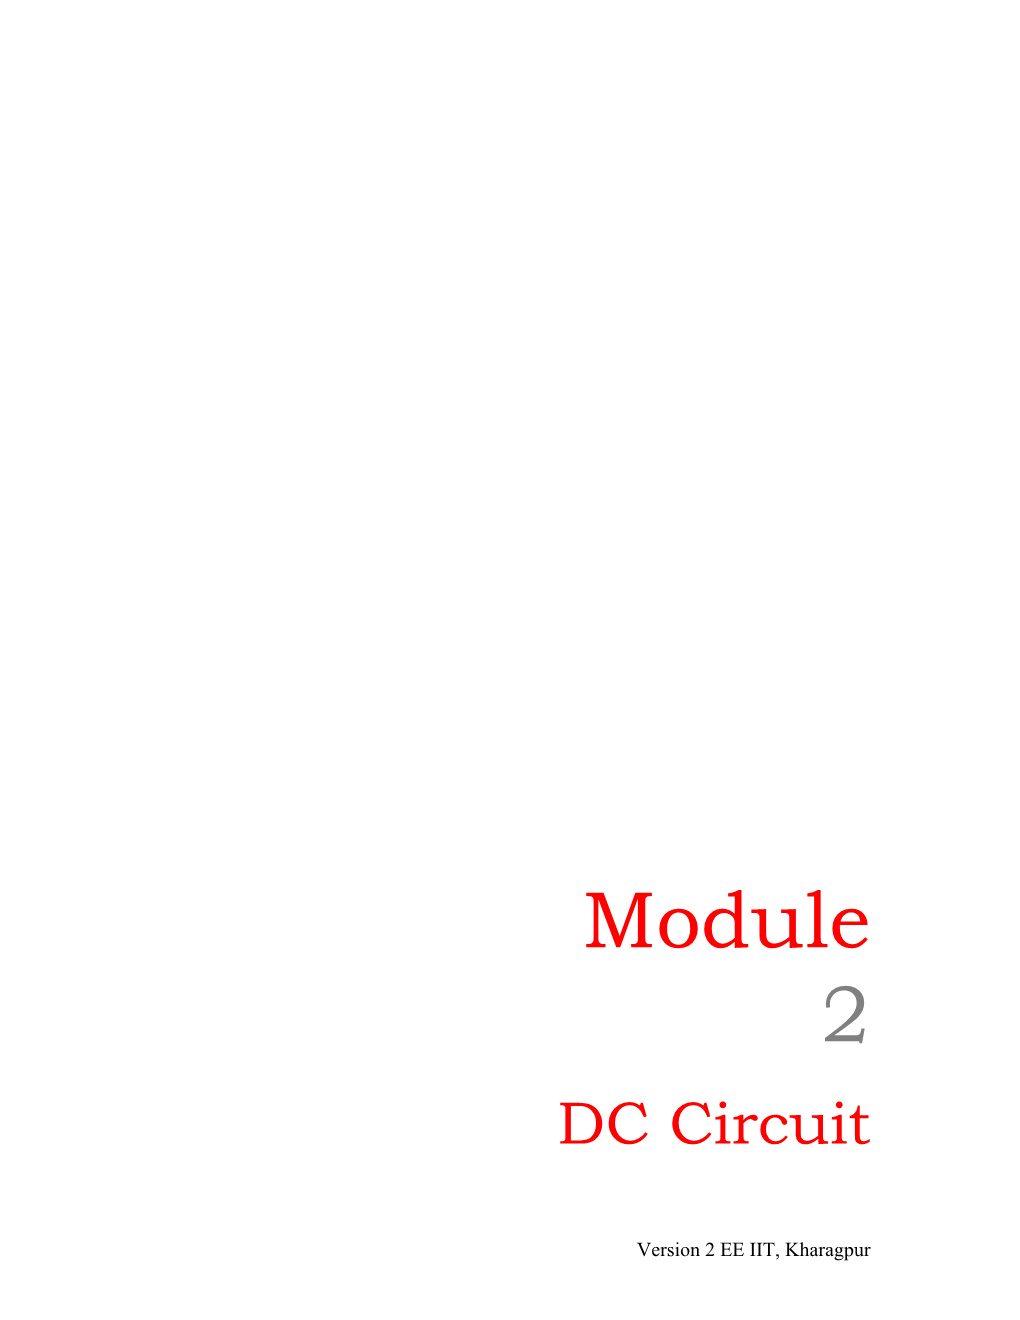 Lesson-3: Introduction of Electric Circuit